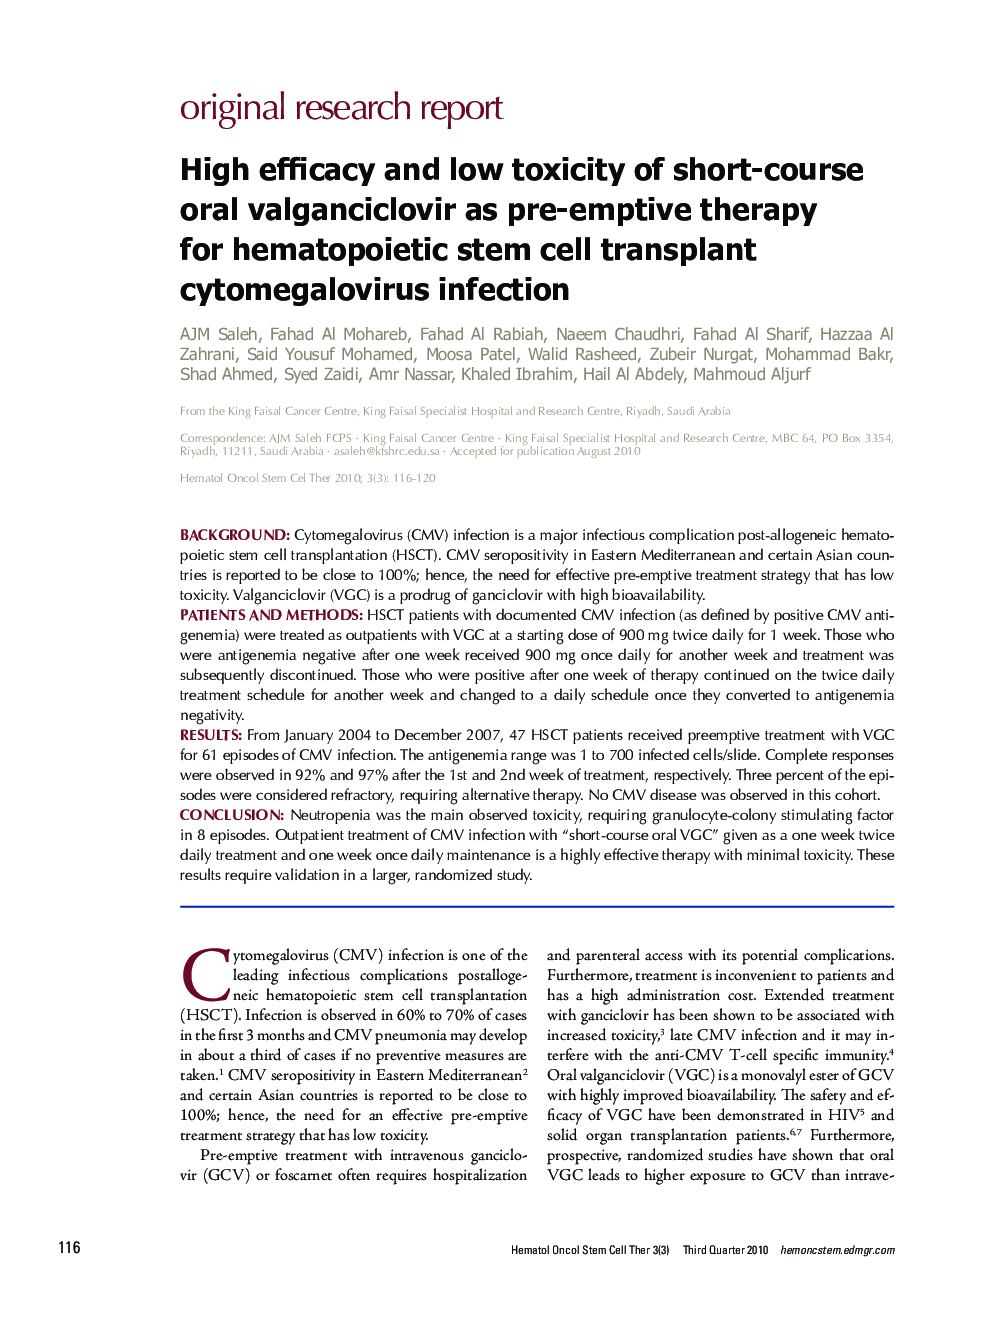 High efficacy and low toxicity of short-course oral valganciclovir as pre-emptive therapy for hematopoietic stem cell transplant cytomegalovirus infection